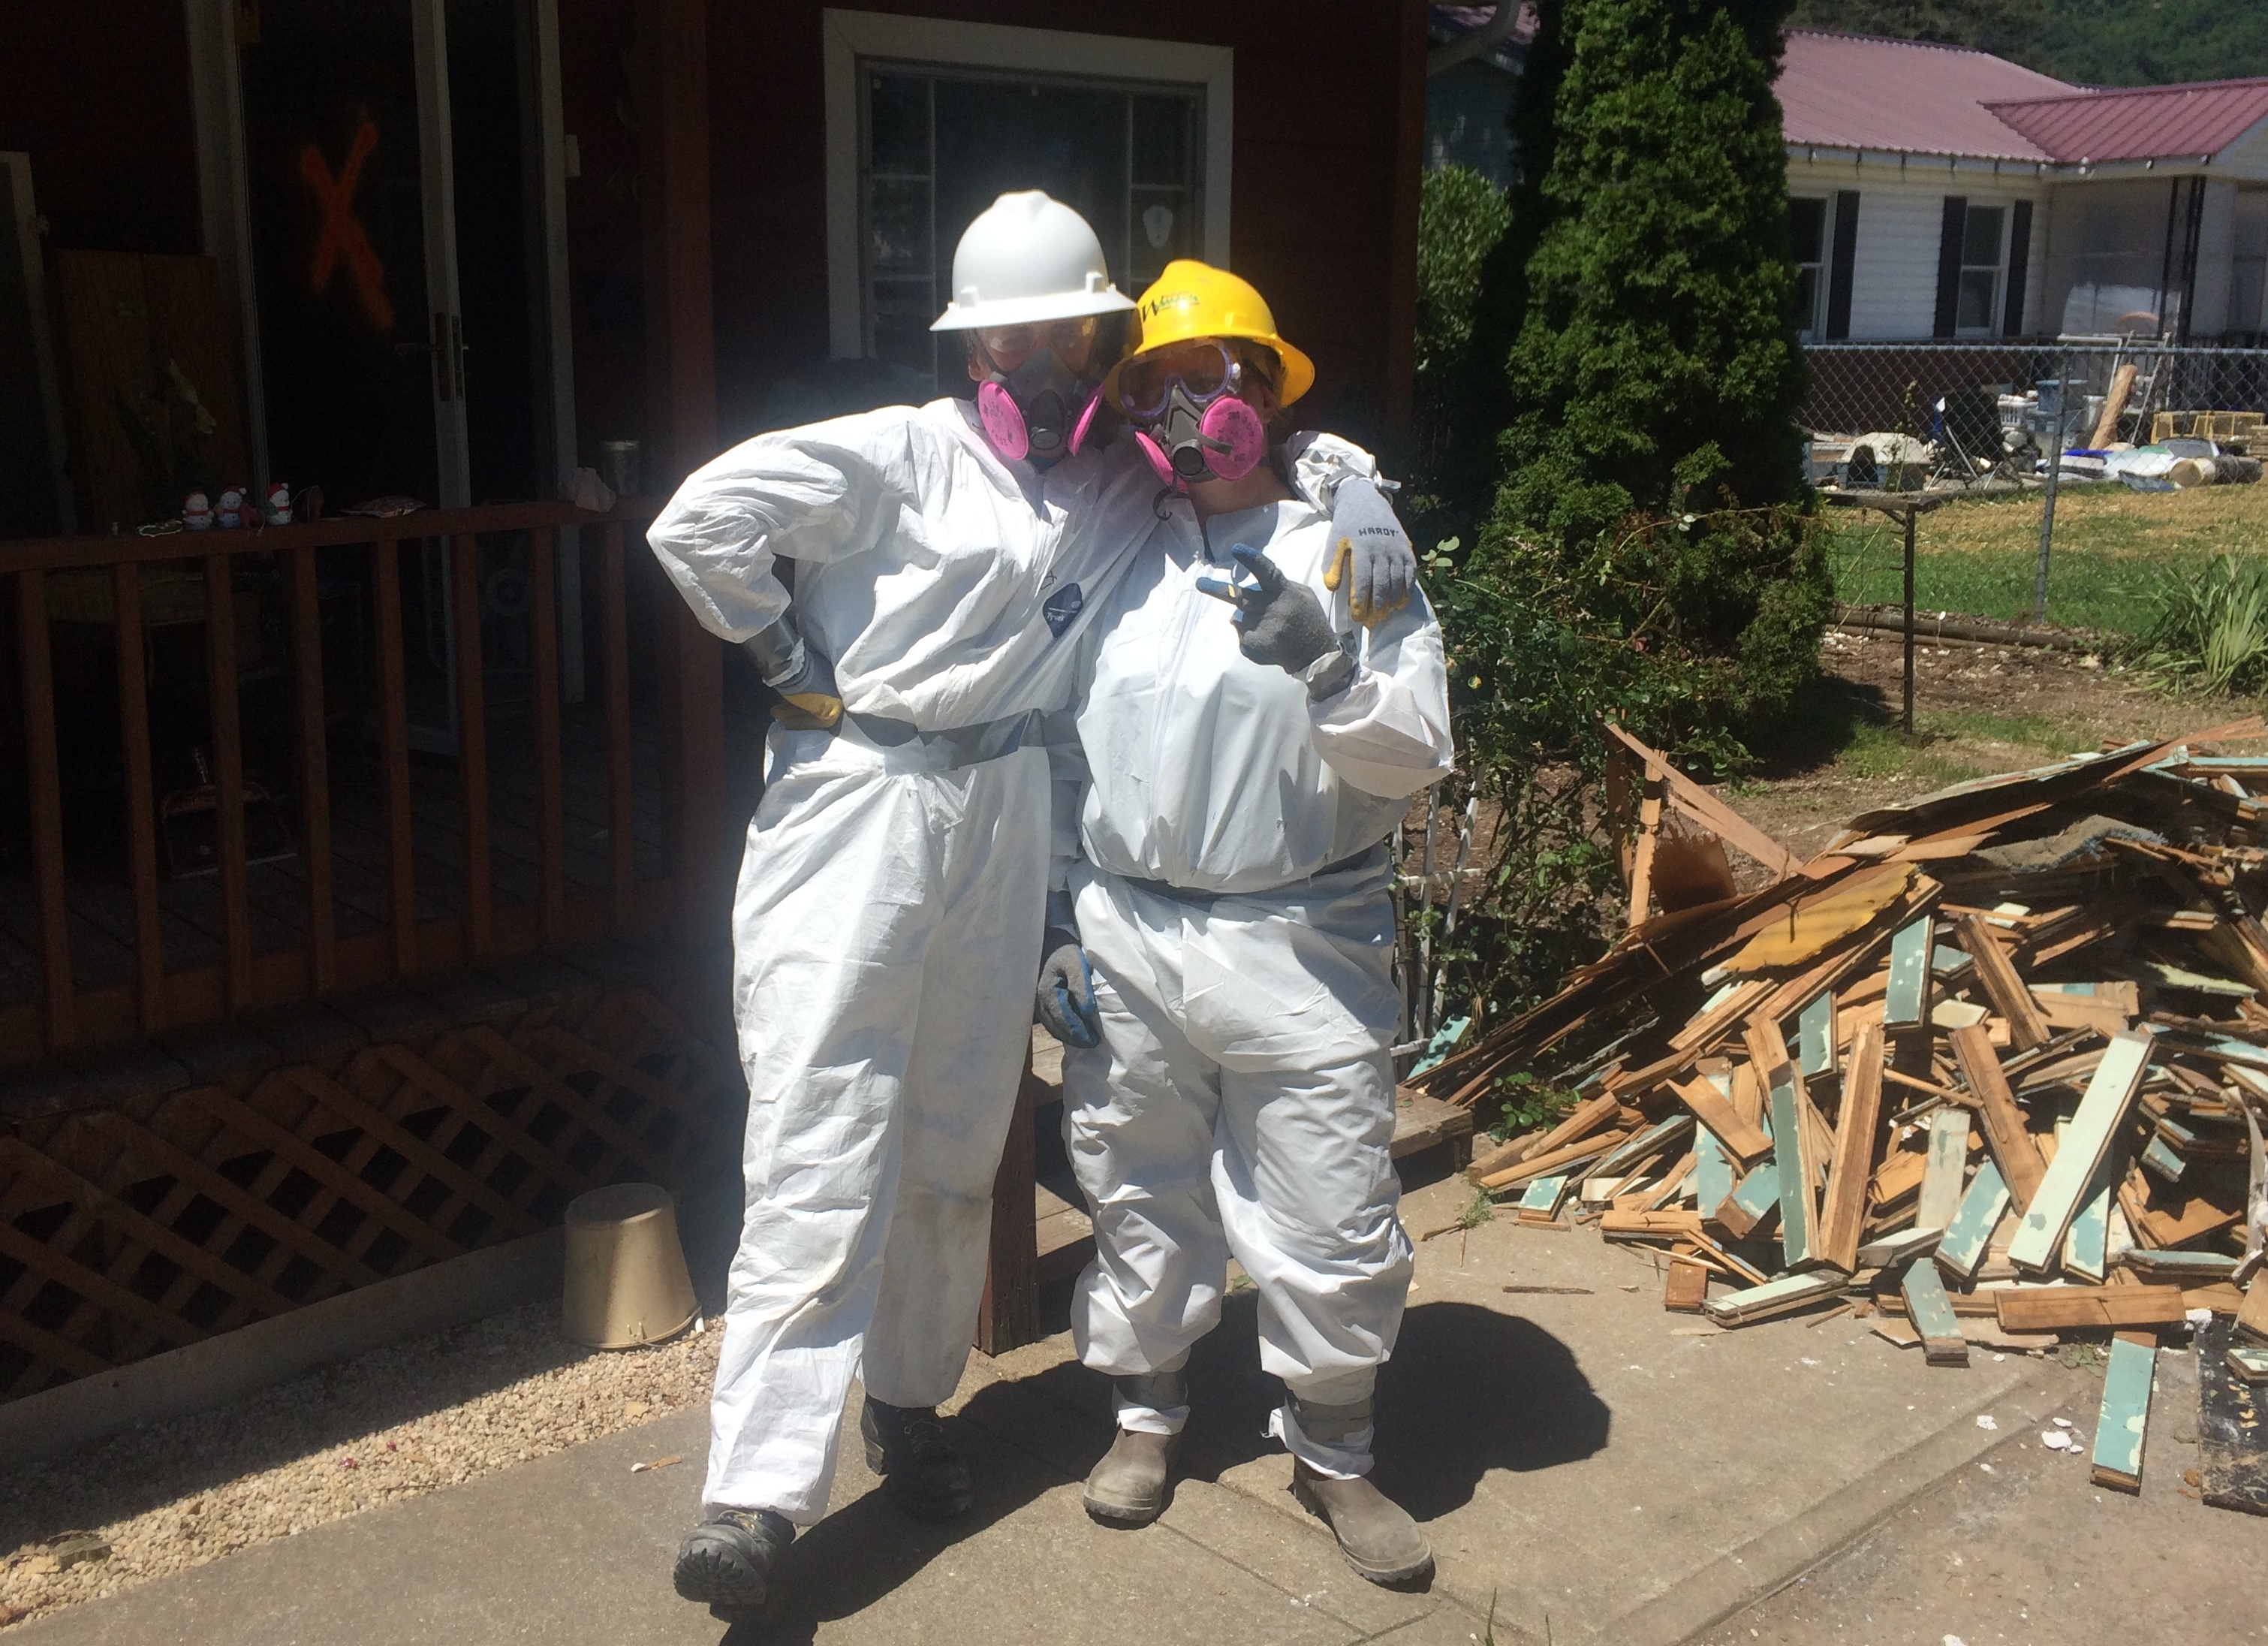 WCC AmeriCorps members stand near pile of debris they removed while mucking and gutting a West Virginia home.